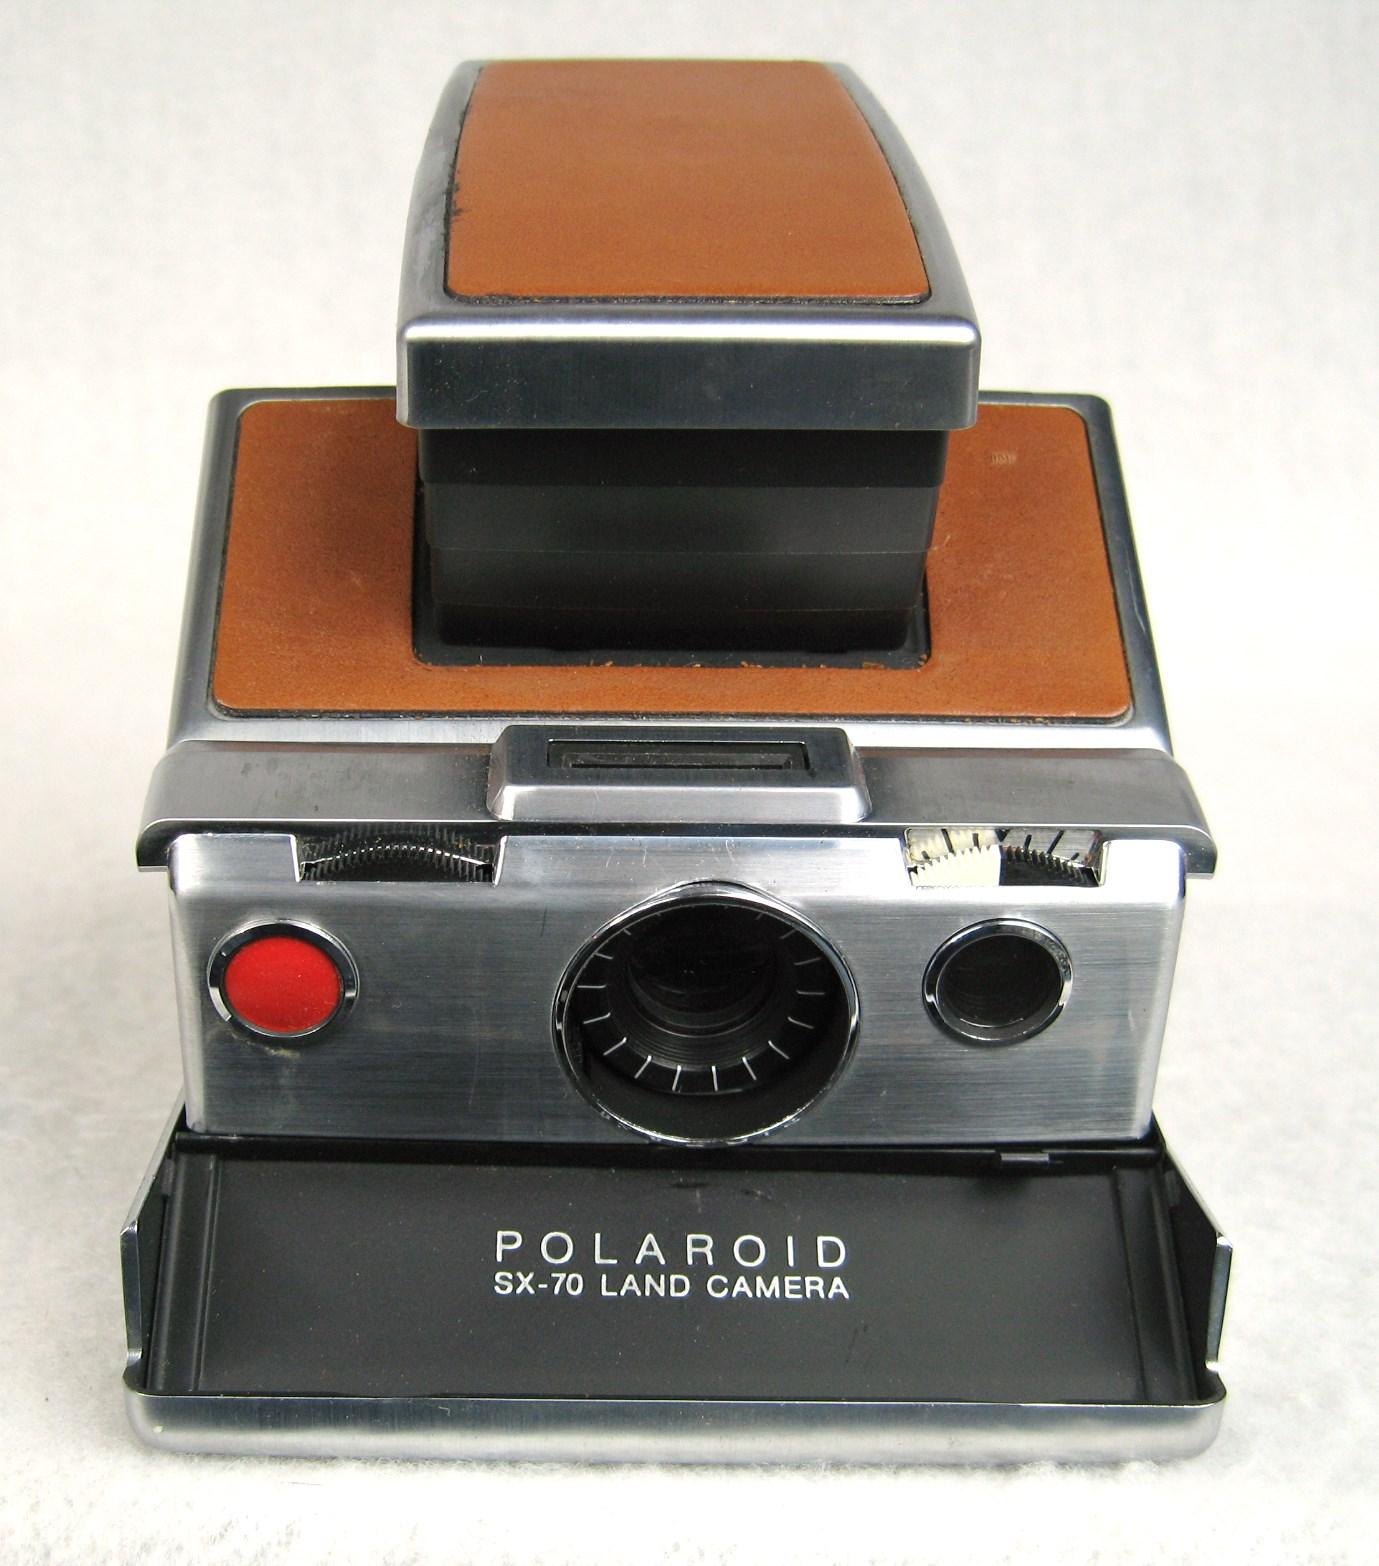 Polaroid SX-70 is one of the most famous instant cameras in the world. It was the first instant SLR camera ever made, and the first to use Polaroid’s now-iconic instant film which brought photos to life the moment they left the camera. Its manual